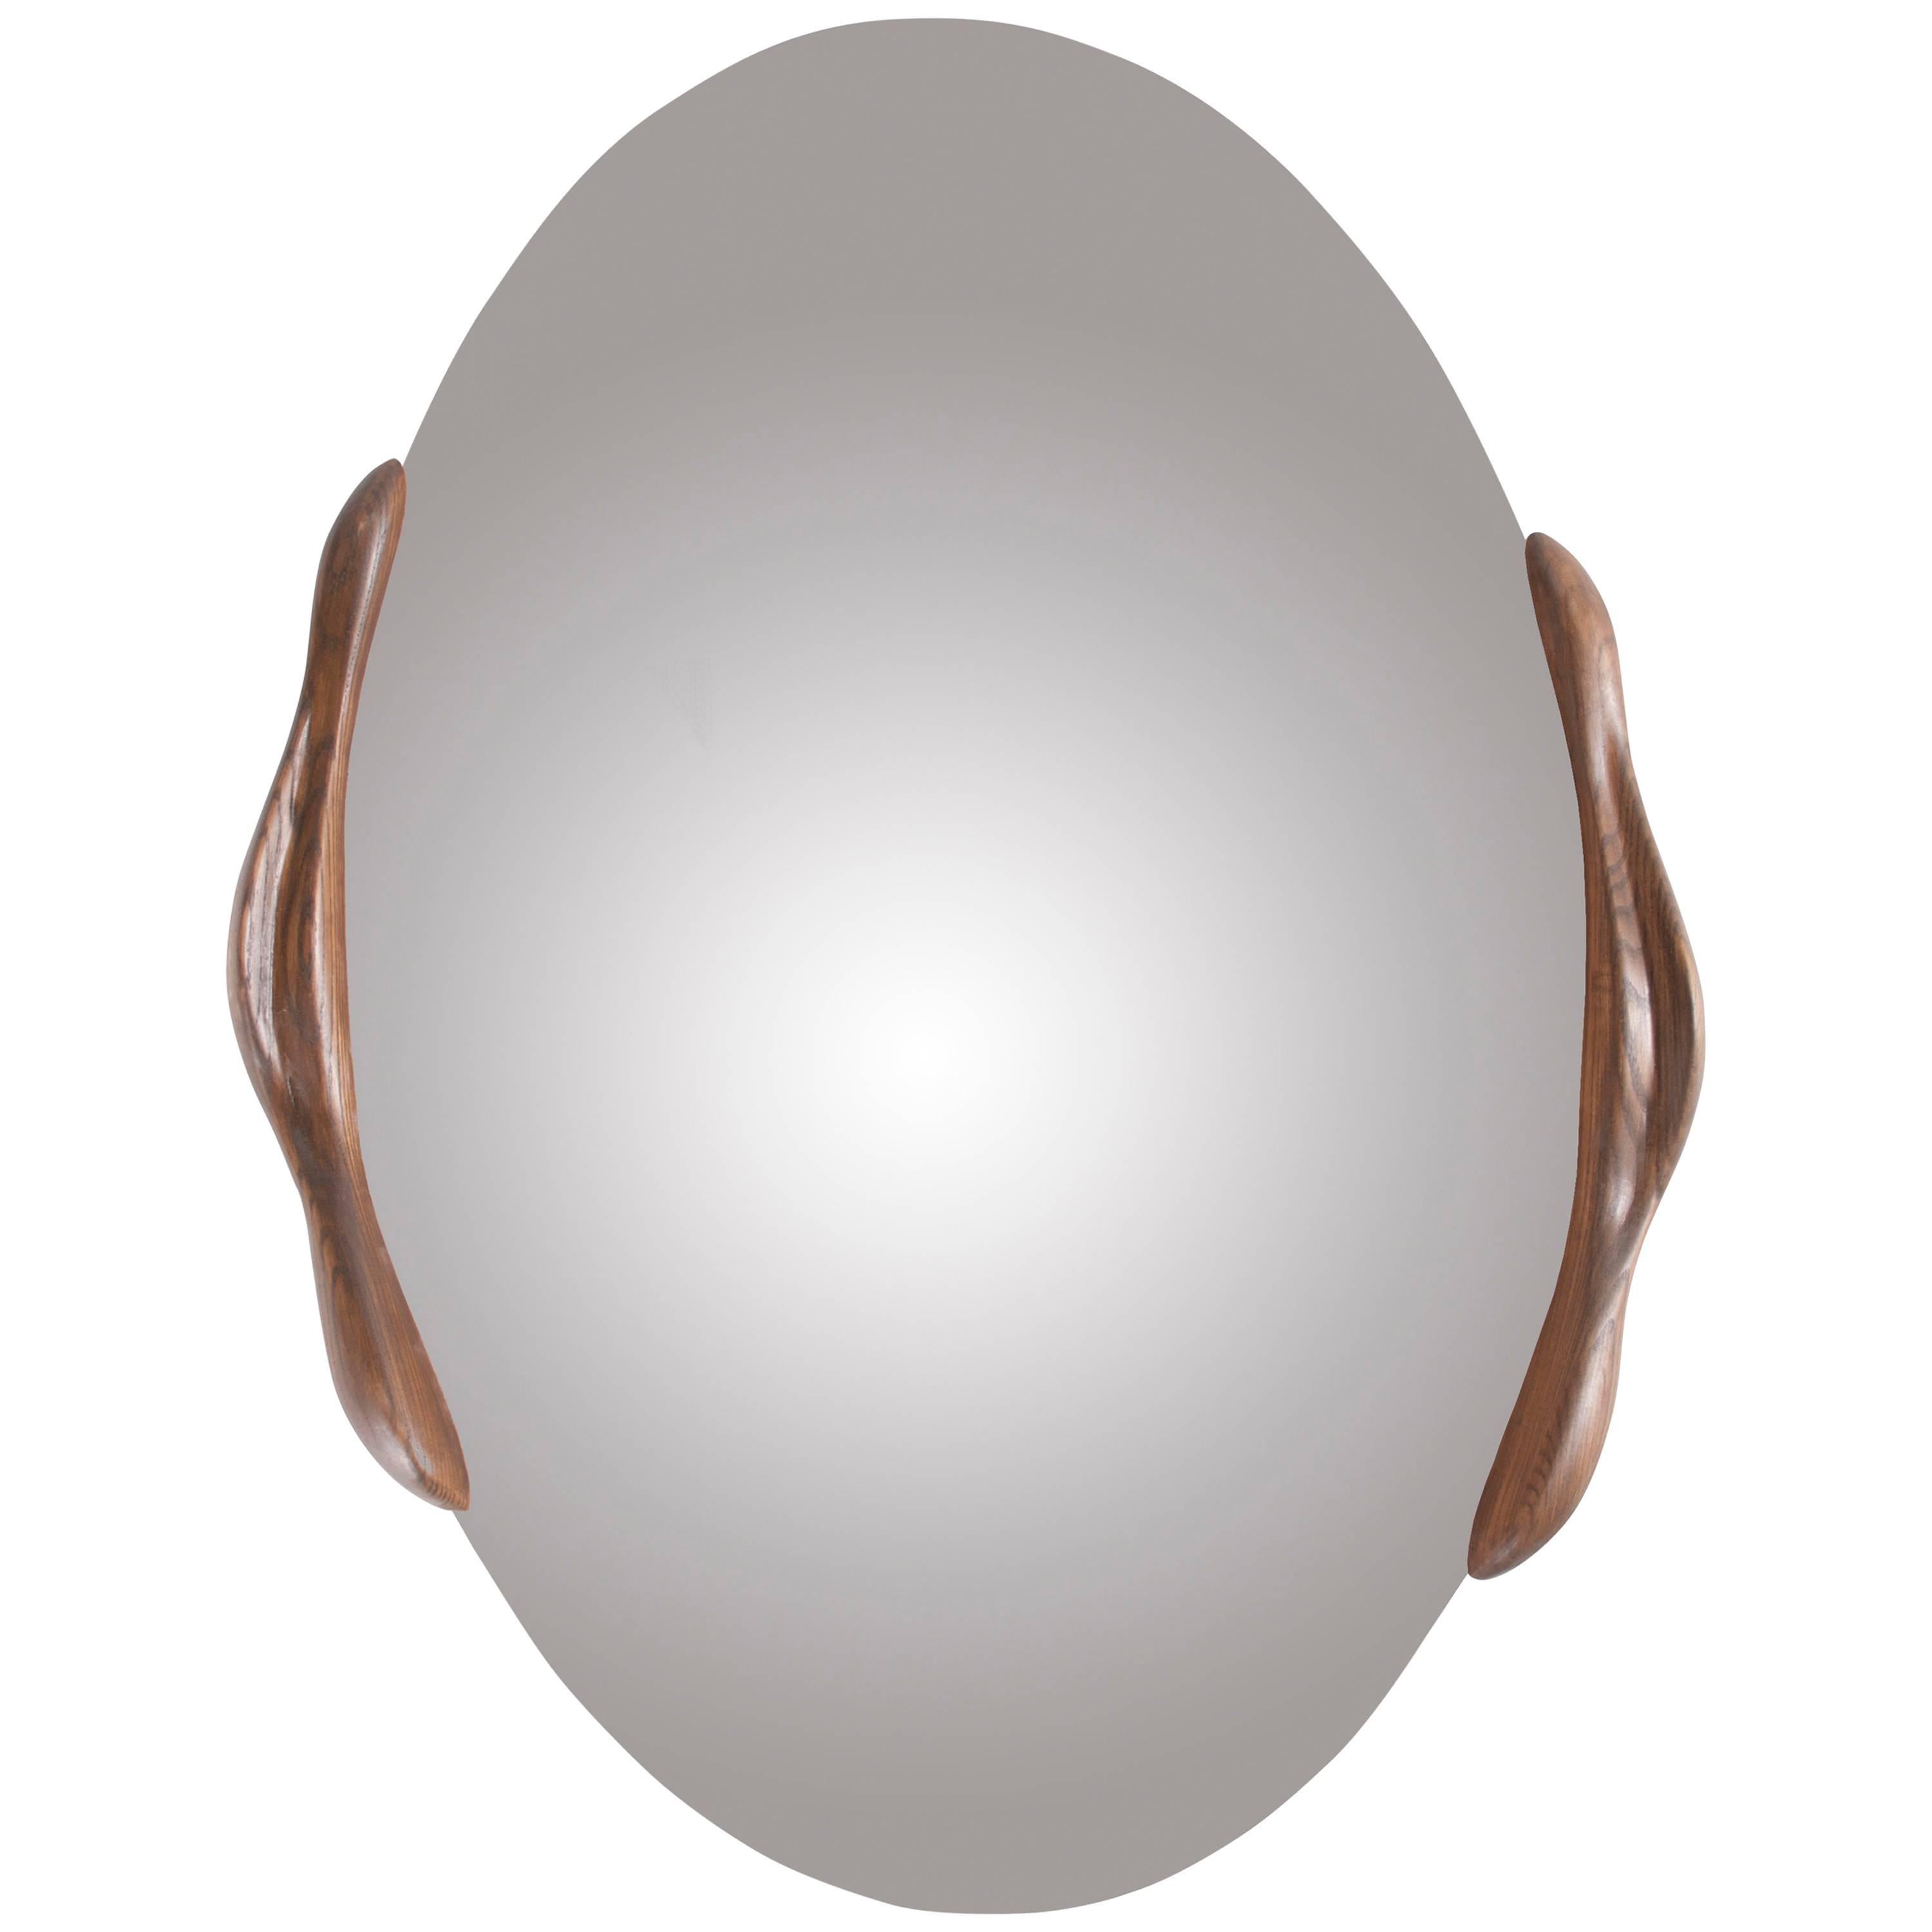 Amorph Oval Shaped Mirror in Walnut stain on Ash wood 